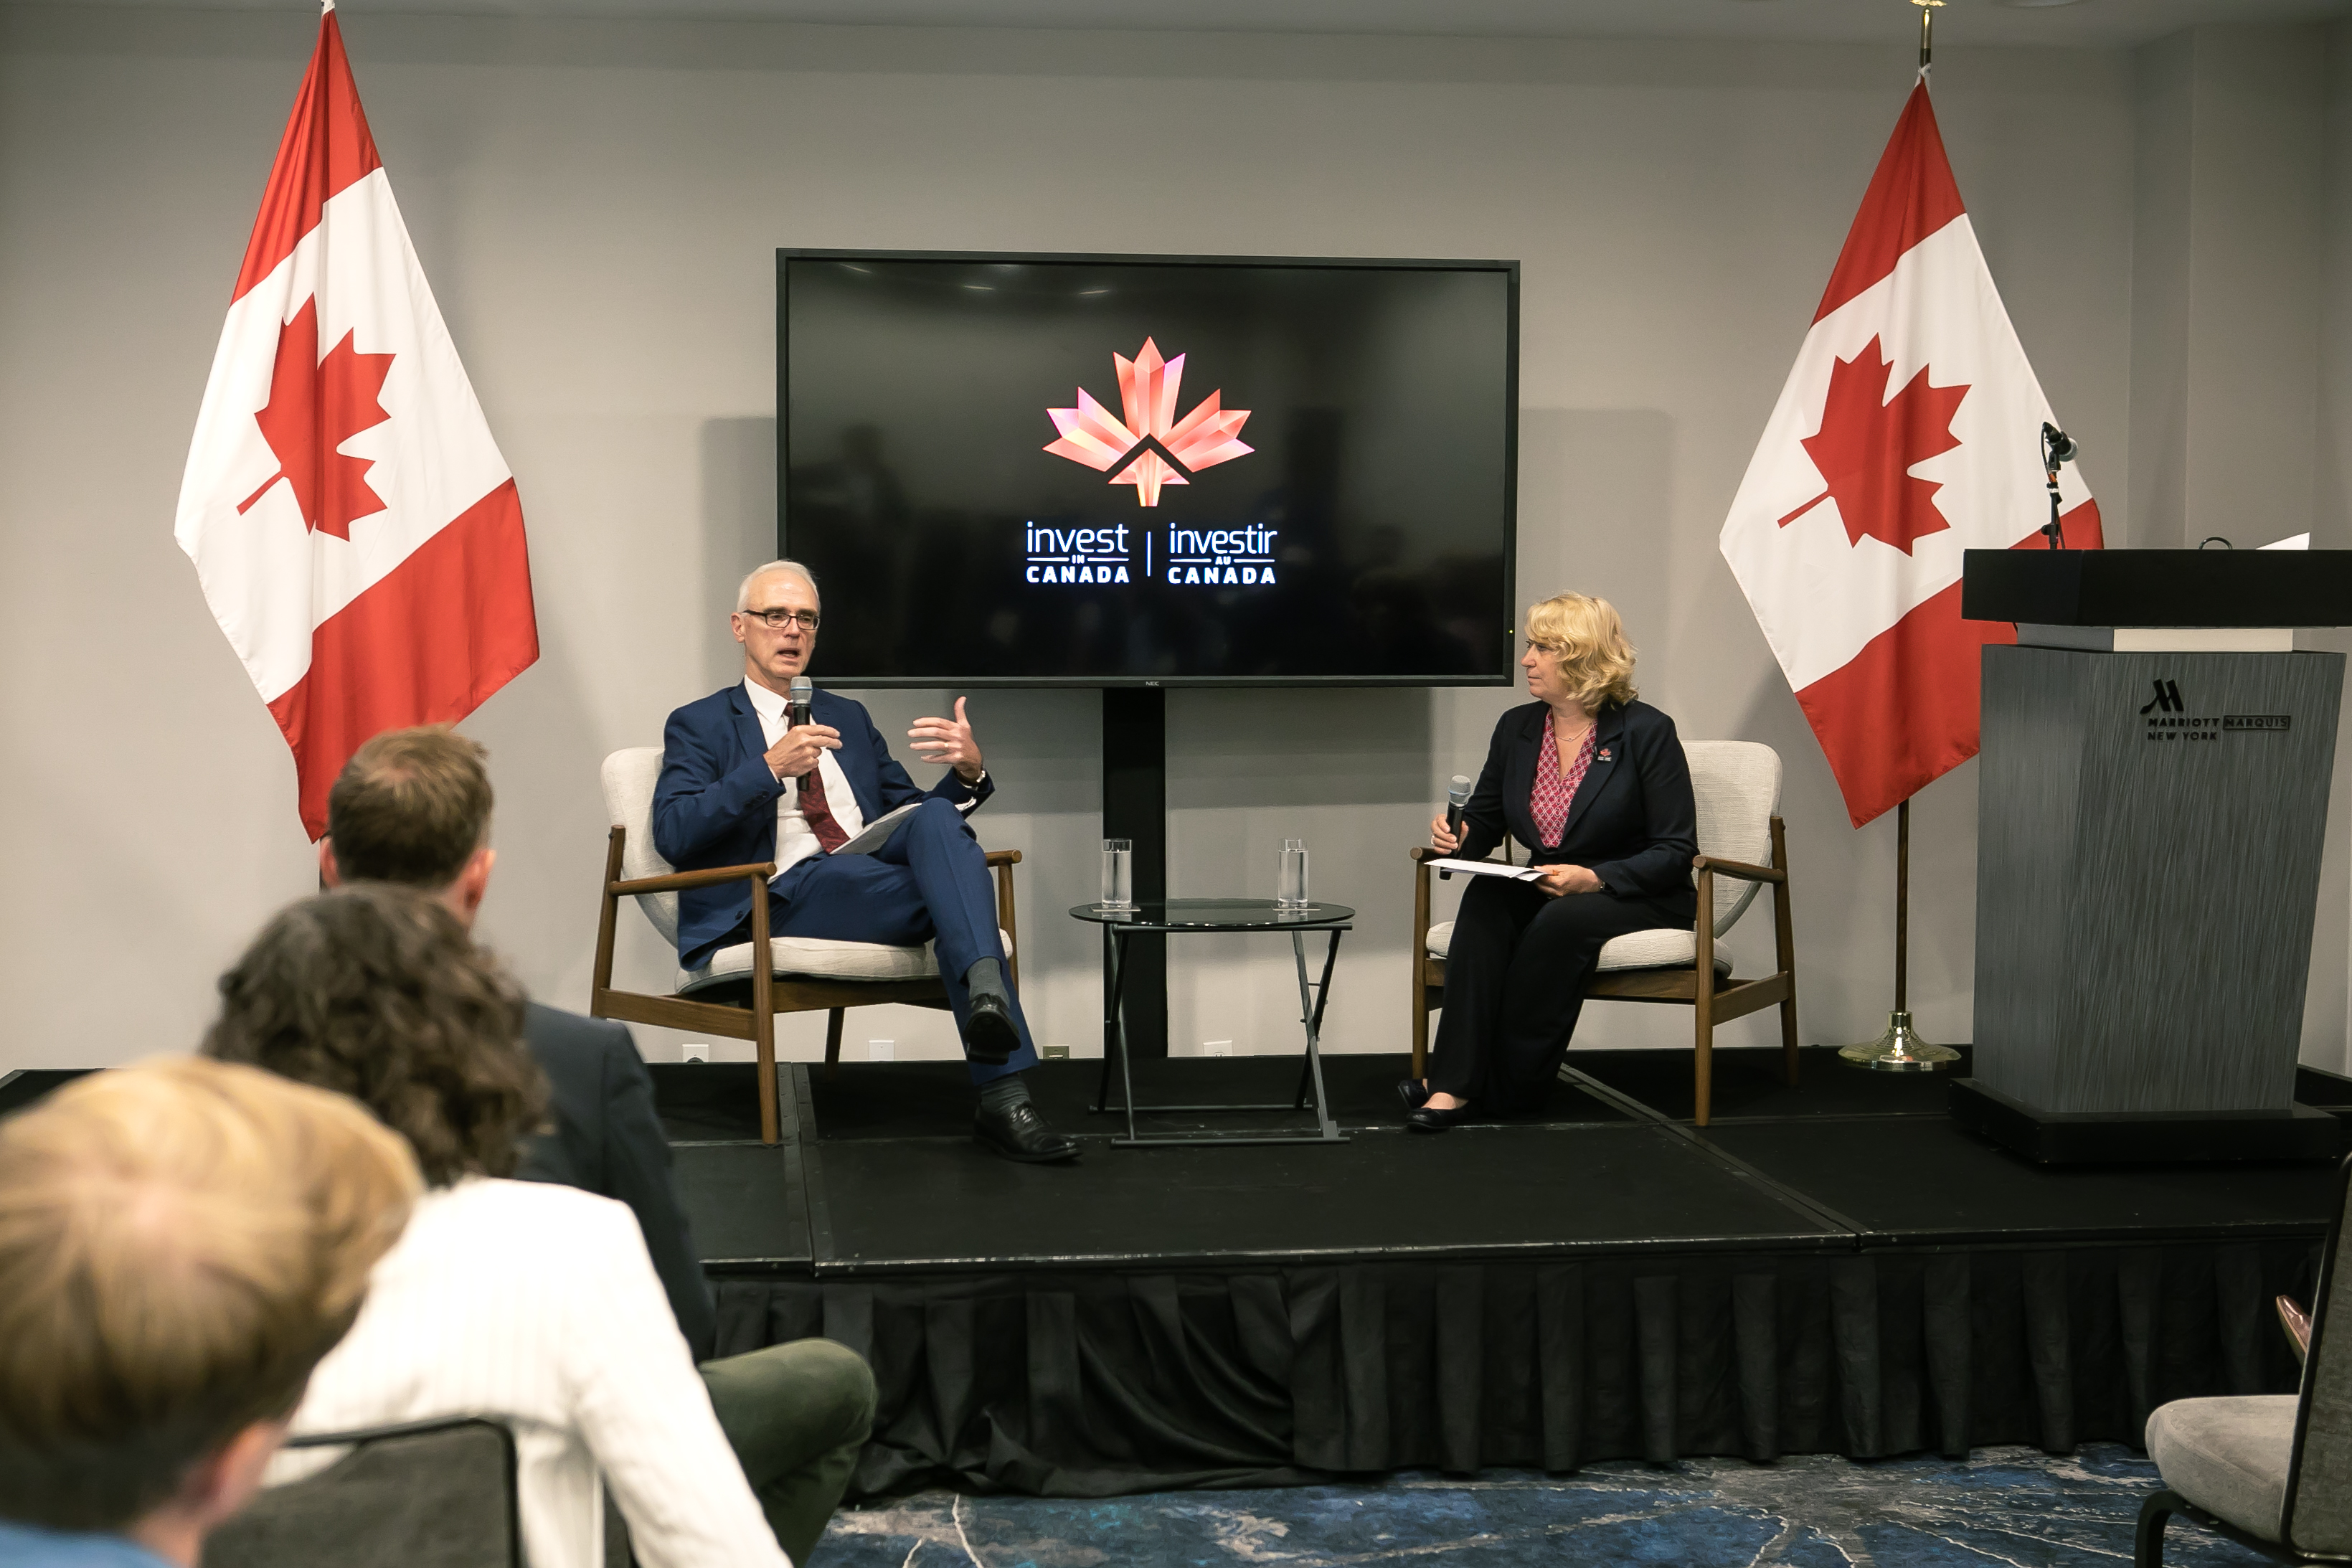 Two people on stage having a discussion with Canada flags in the background